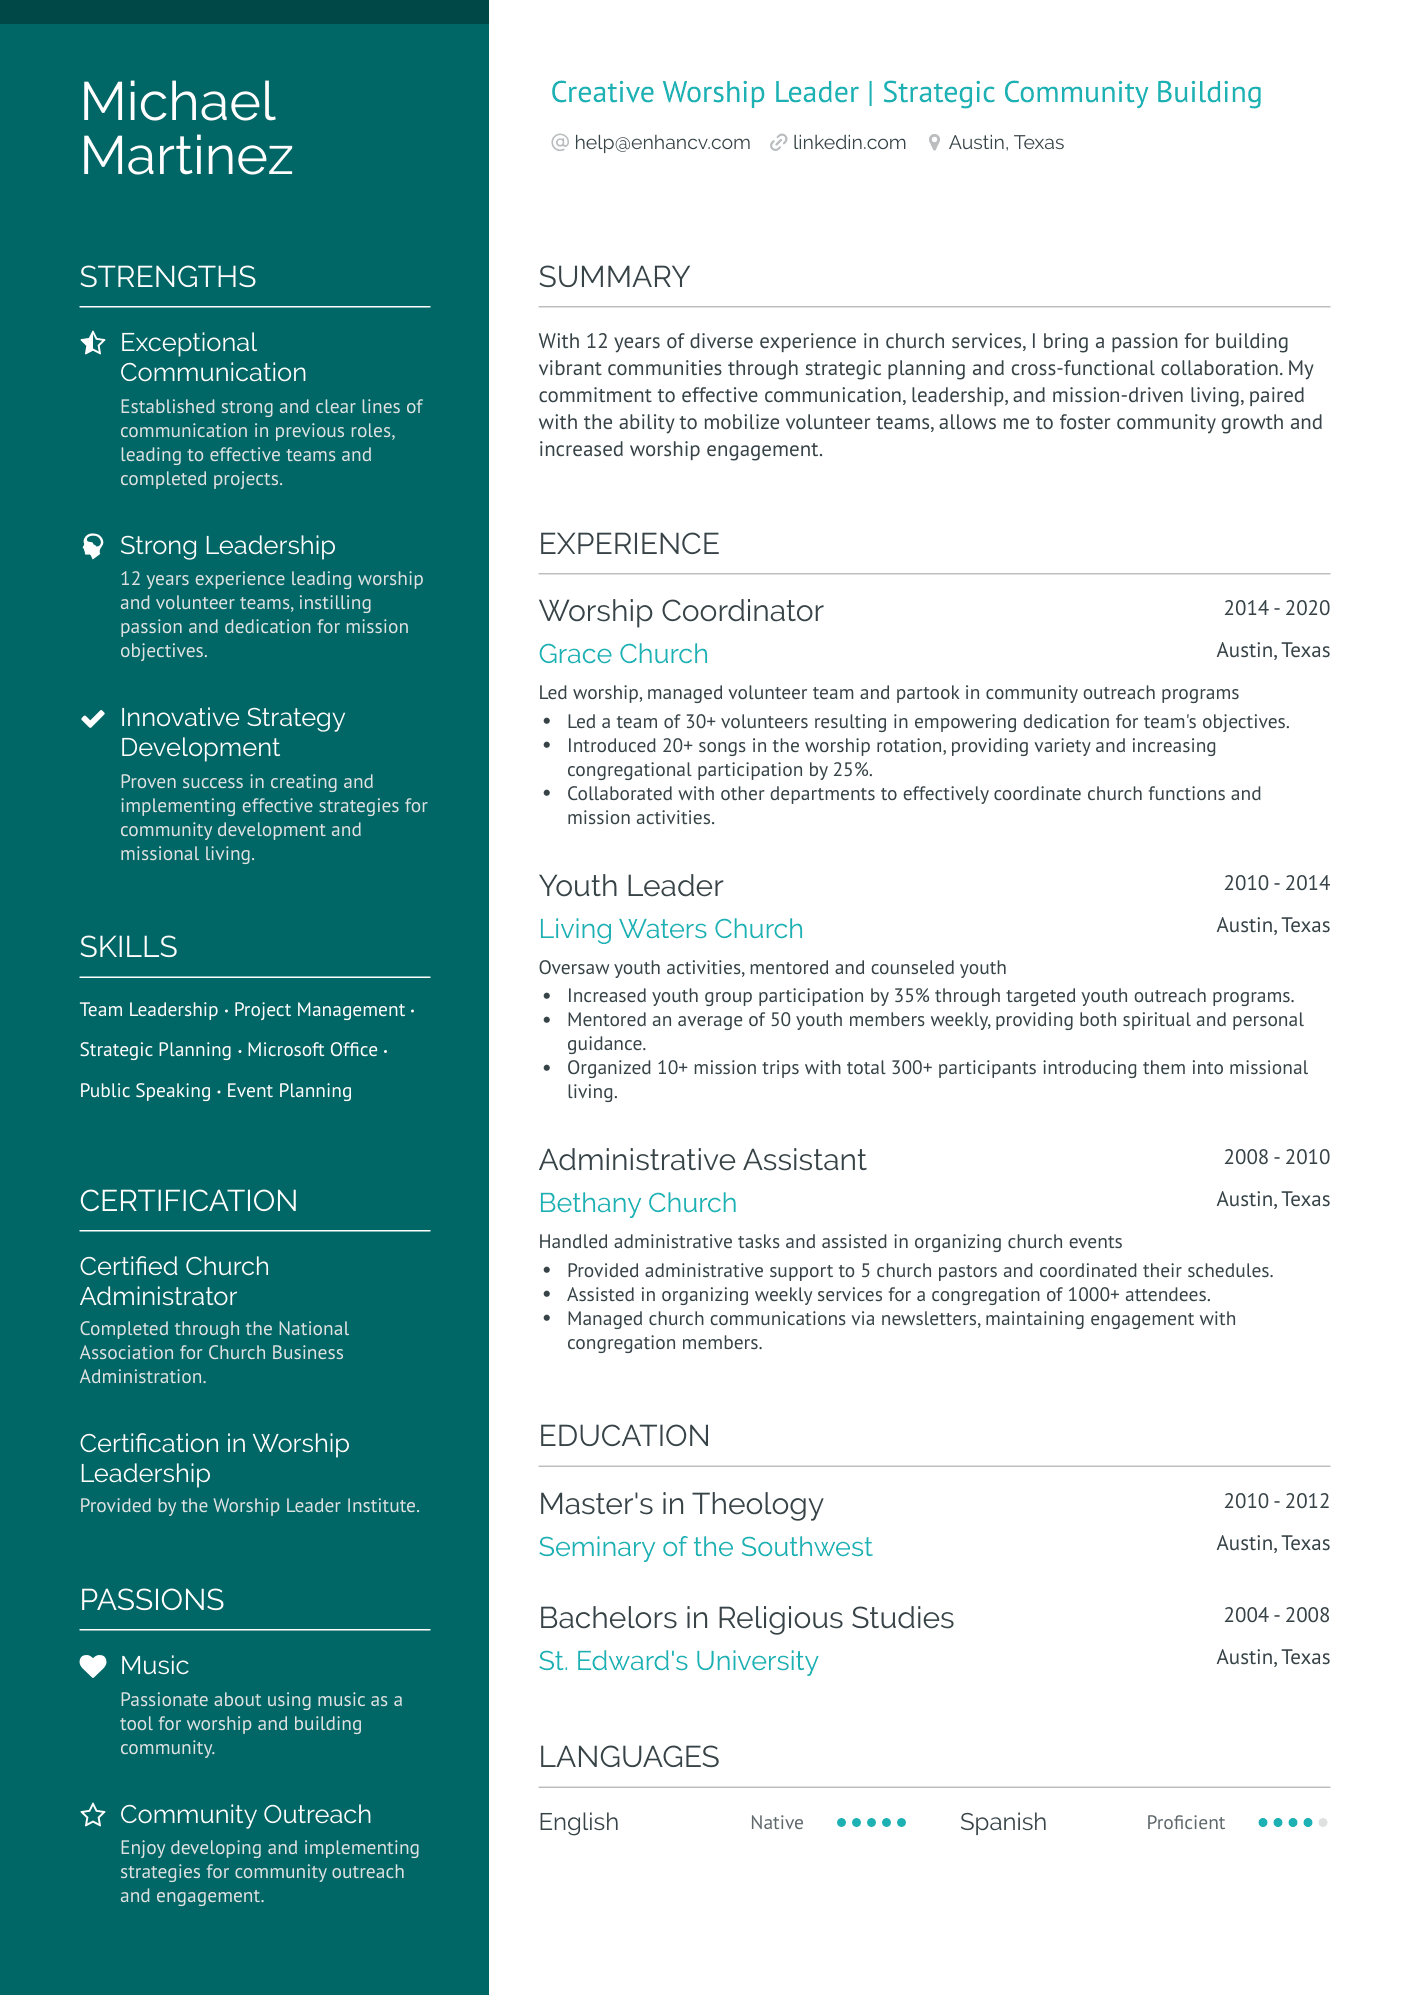 resume format for office administrator